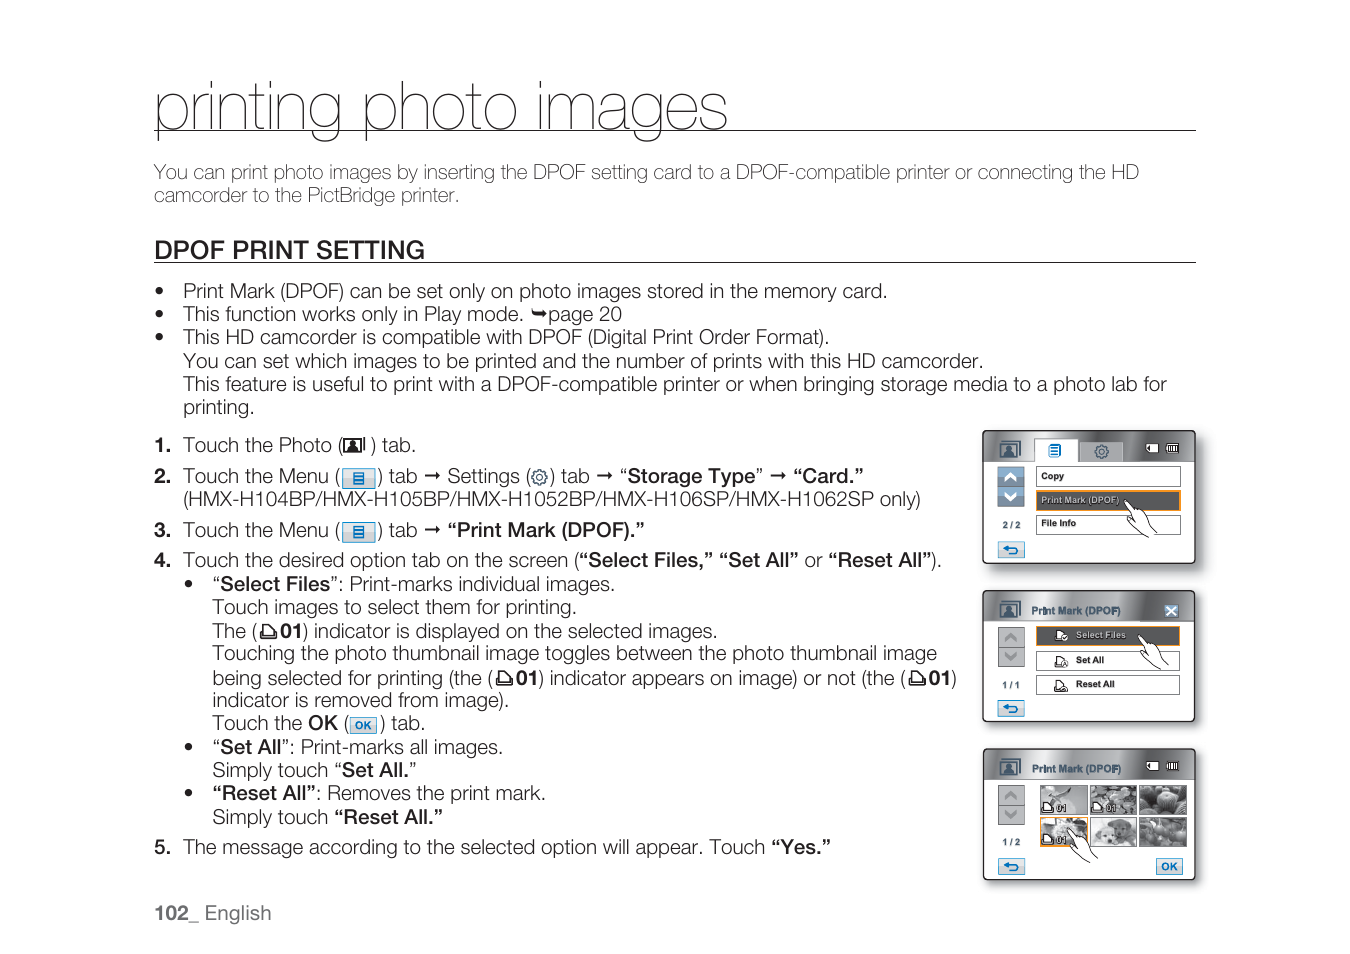 Printing photo images, Dpof print setting | Samsung HMX-H1062SP User Manual | Page 112 / 144